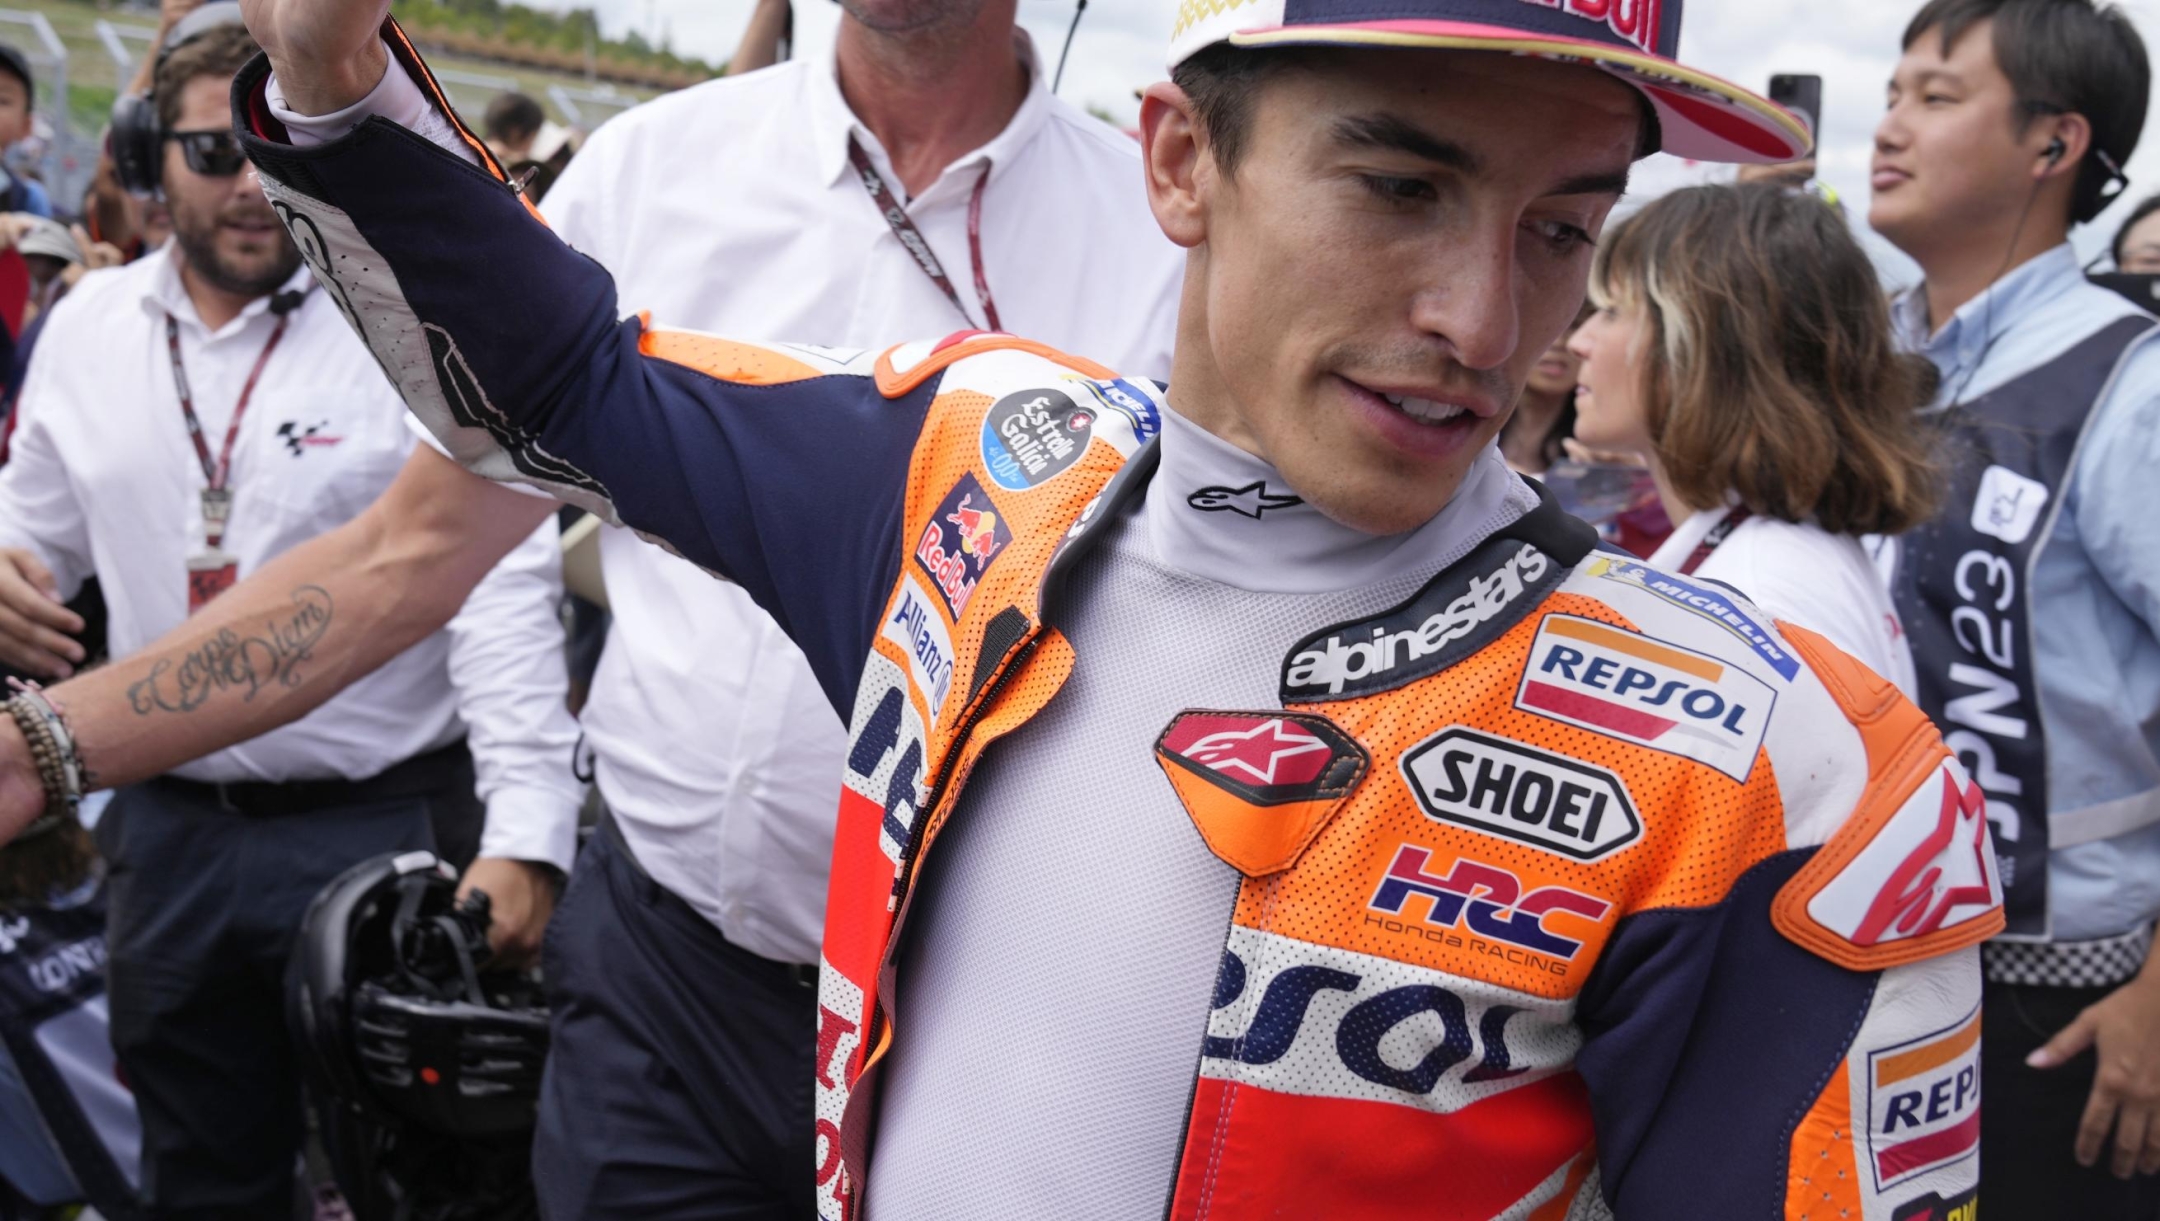 Spanish rider Marc Marquez waves to fans after the MotoGP qualification session for Sunday's Japanese Motorcycle Grand Prix at the Twin Ring Motegi circuit in Motegi, north of Tokyo Saturday Sept. 30, 2023. Honda’s MotoGP team says that former world champion Marc Márquez will be leaving the team at the end of the season. That will conclude a highly successful 11-year-stint during which the Spaniards won six MotoGP championships. (AP Photo/Shuji Kajiyama)